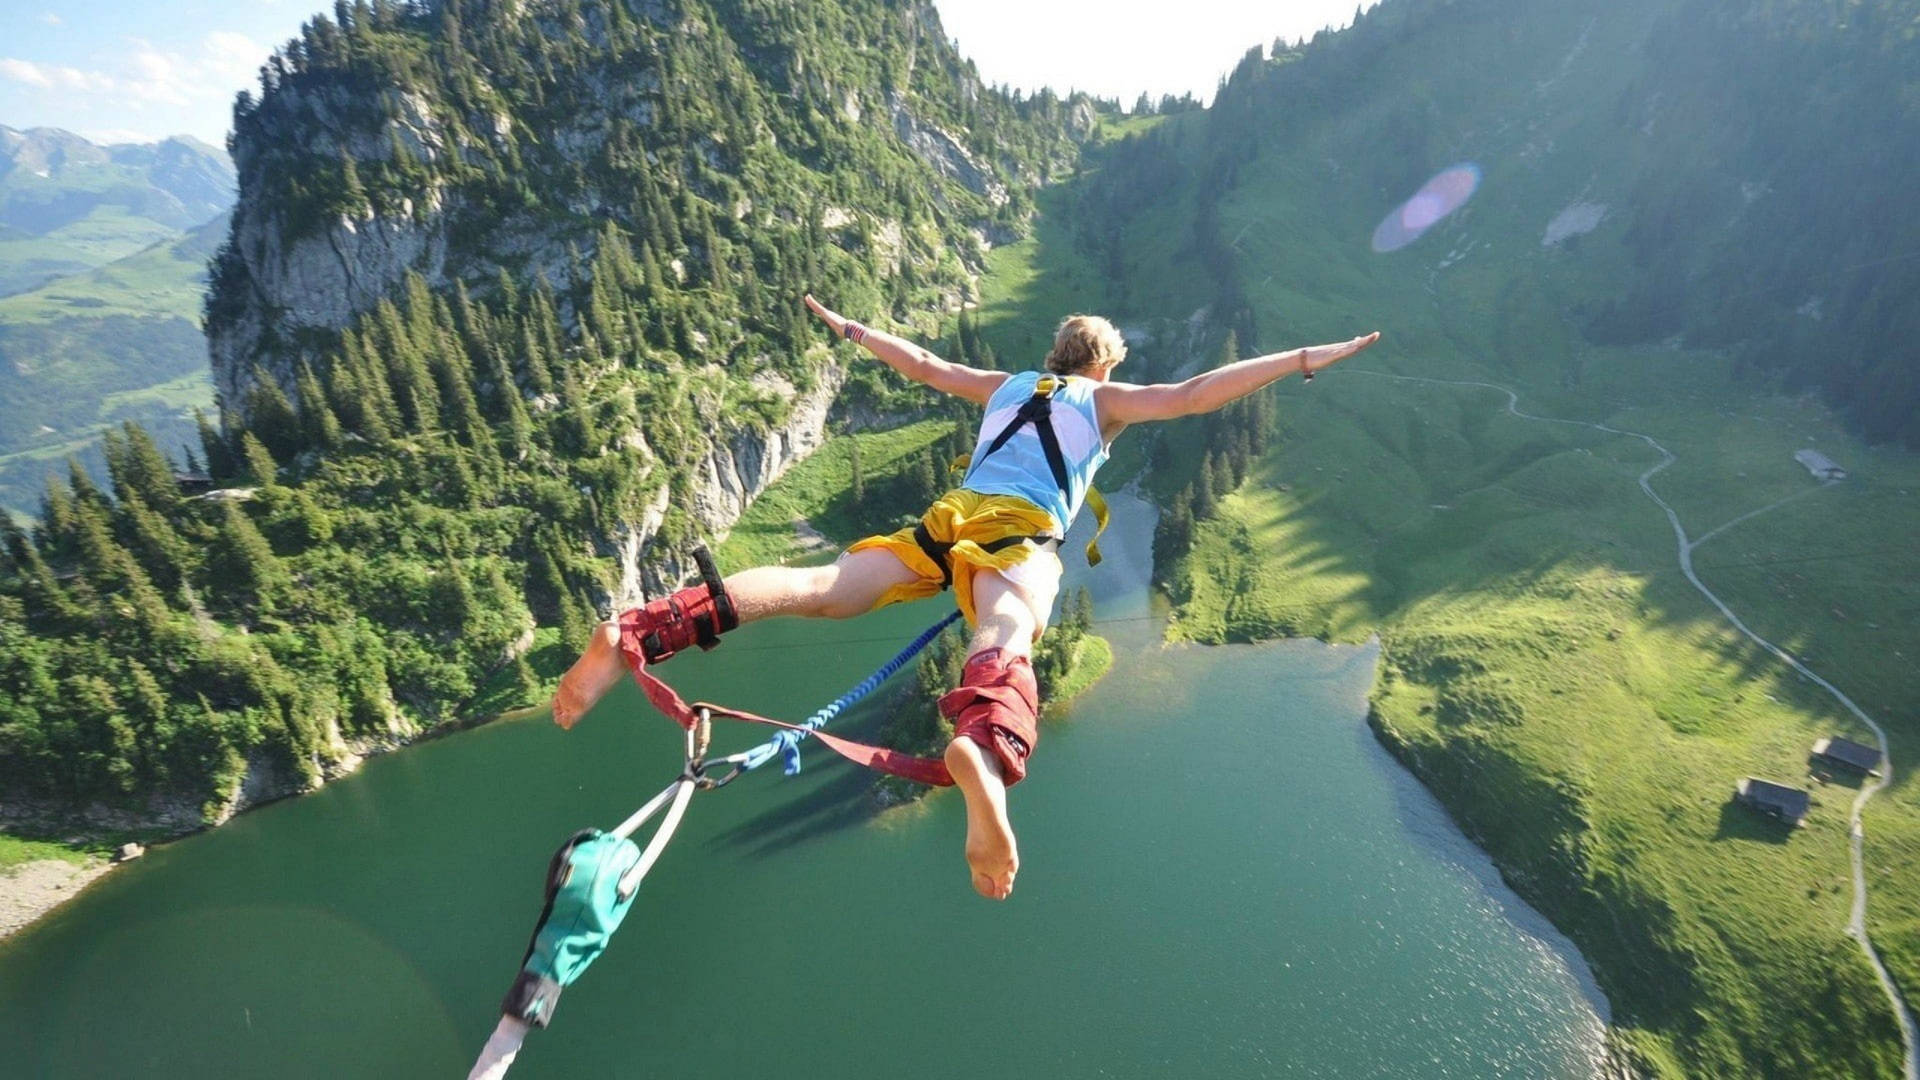 Captivating Leap Of Faith In Extreme Sports: Bungee Jumping